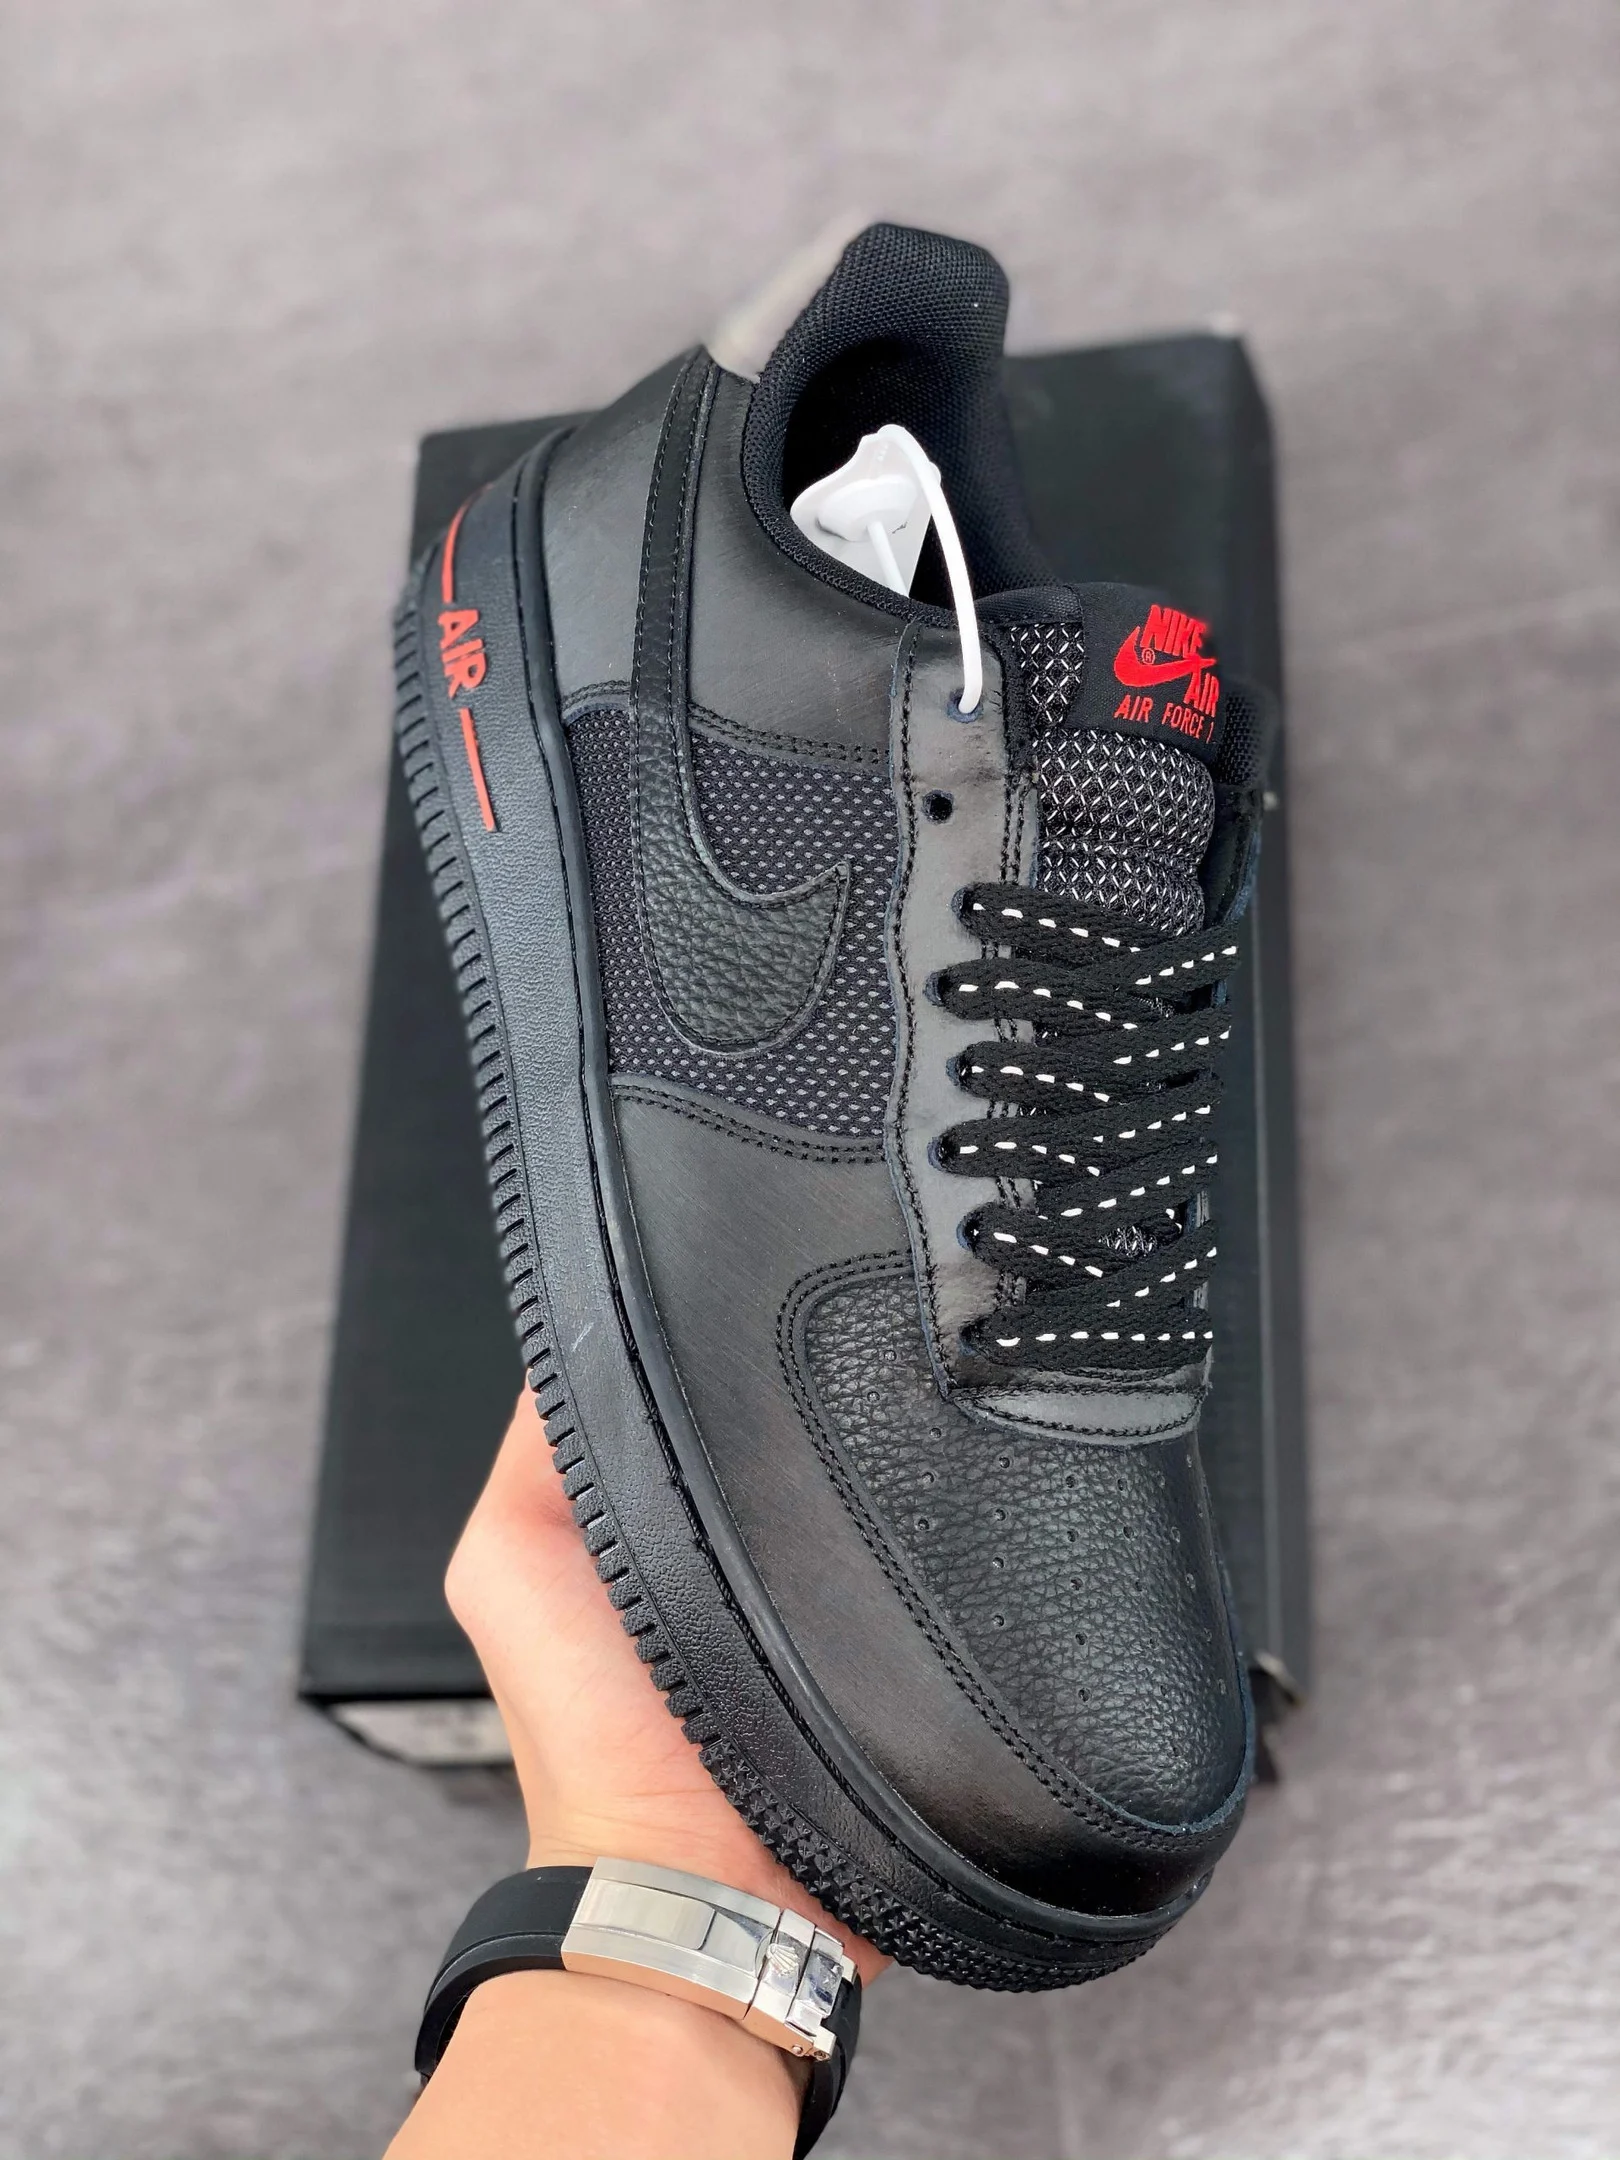 Nike Air Force 1 Low Black Red with Reflective Accents